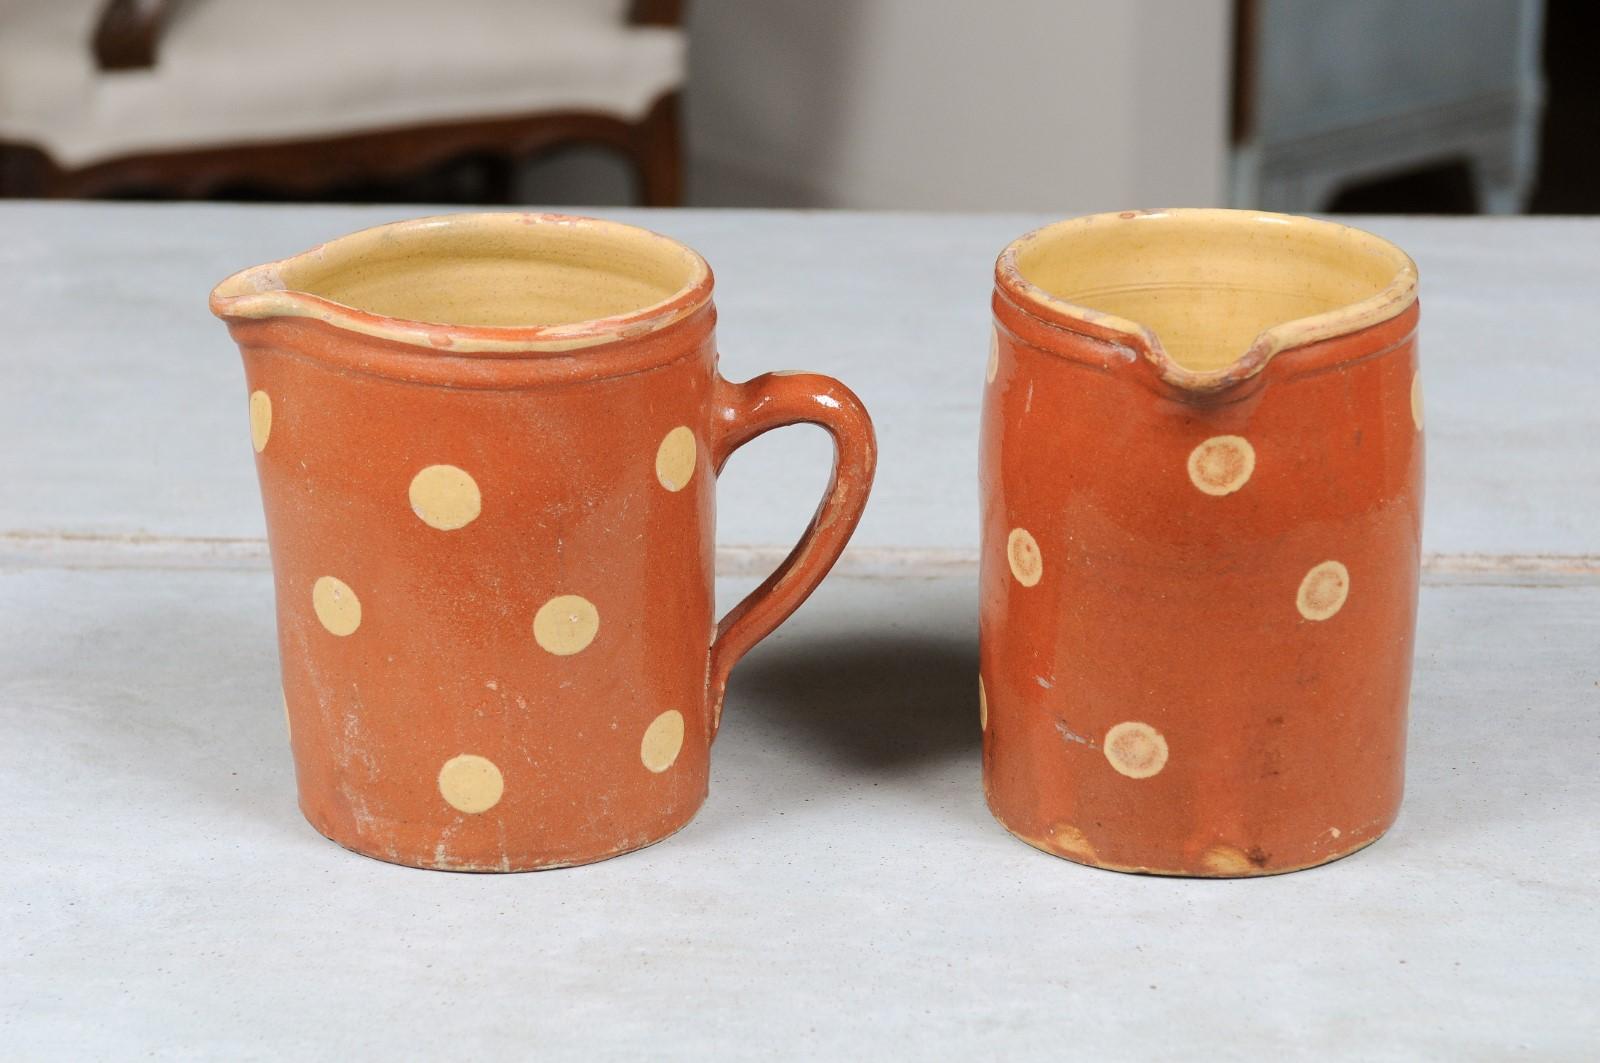 19th Century French Jaspe Ware Pottery Pitchers with Burnt Orange Glaze, ONE AVAIL.